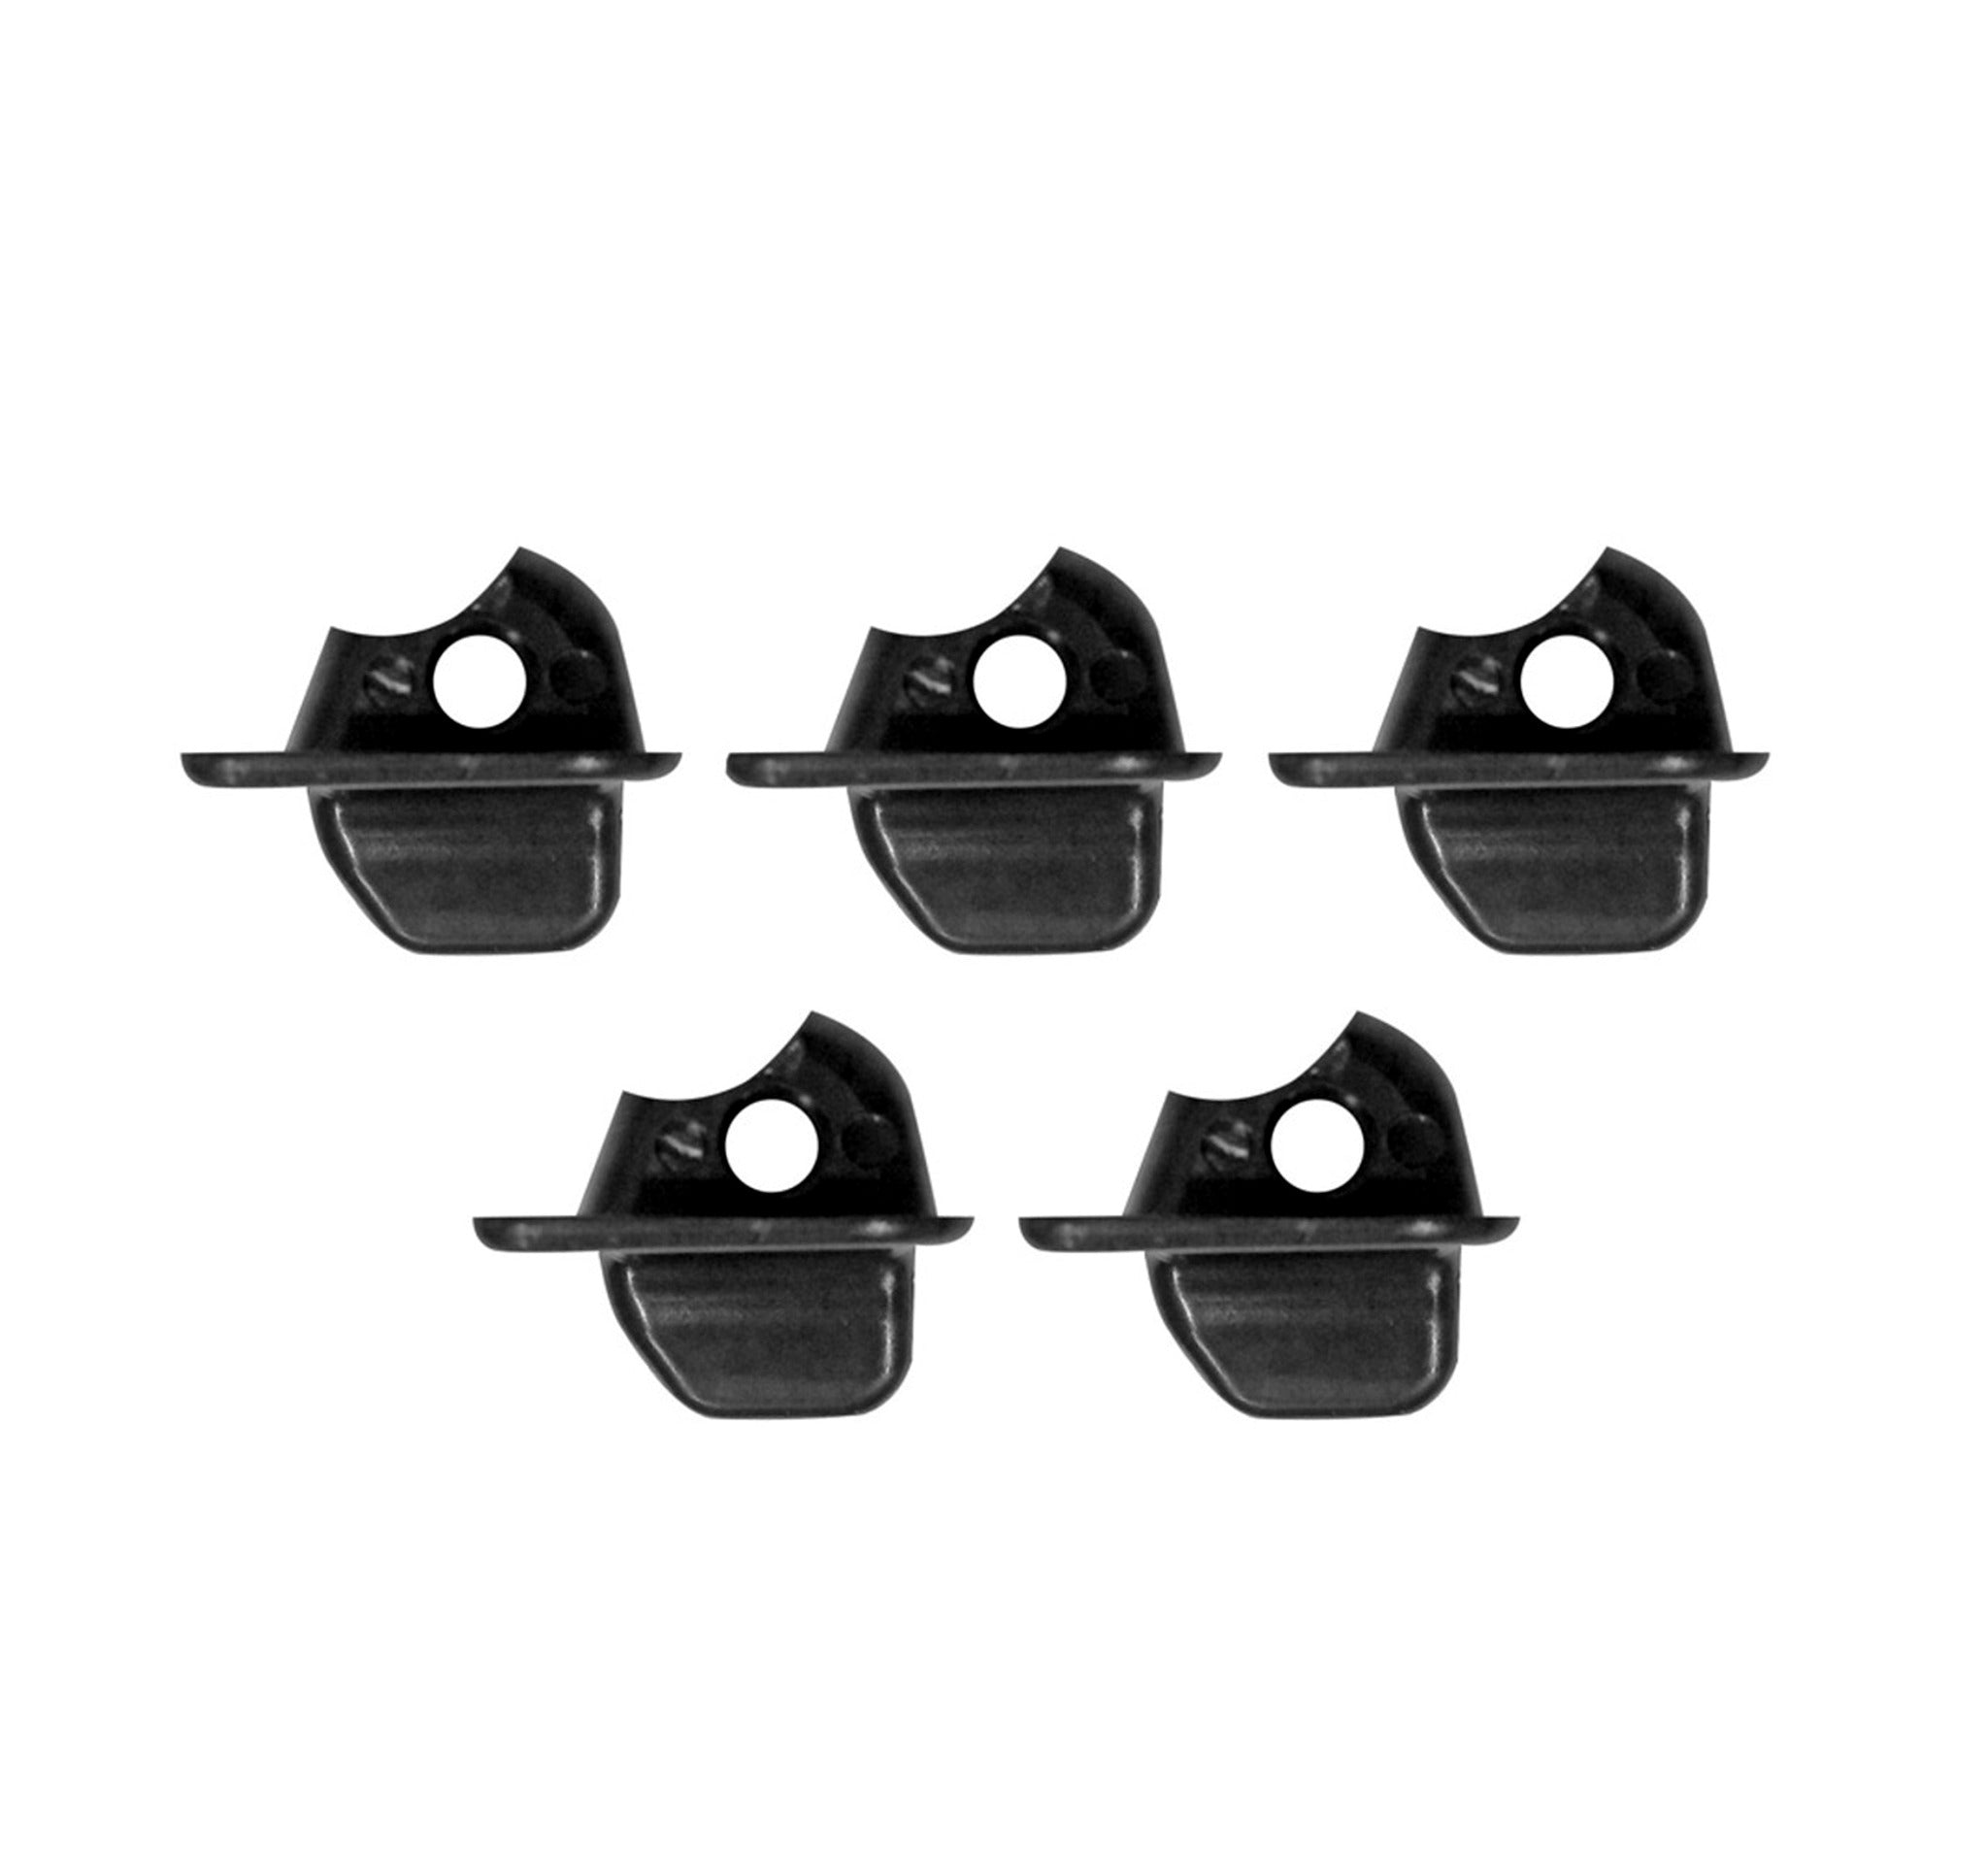 Plastic inserts Nose/Front Piece for Ravaglioli All Next Gen Model and More (5PK)